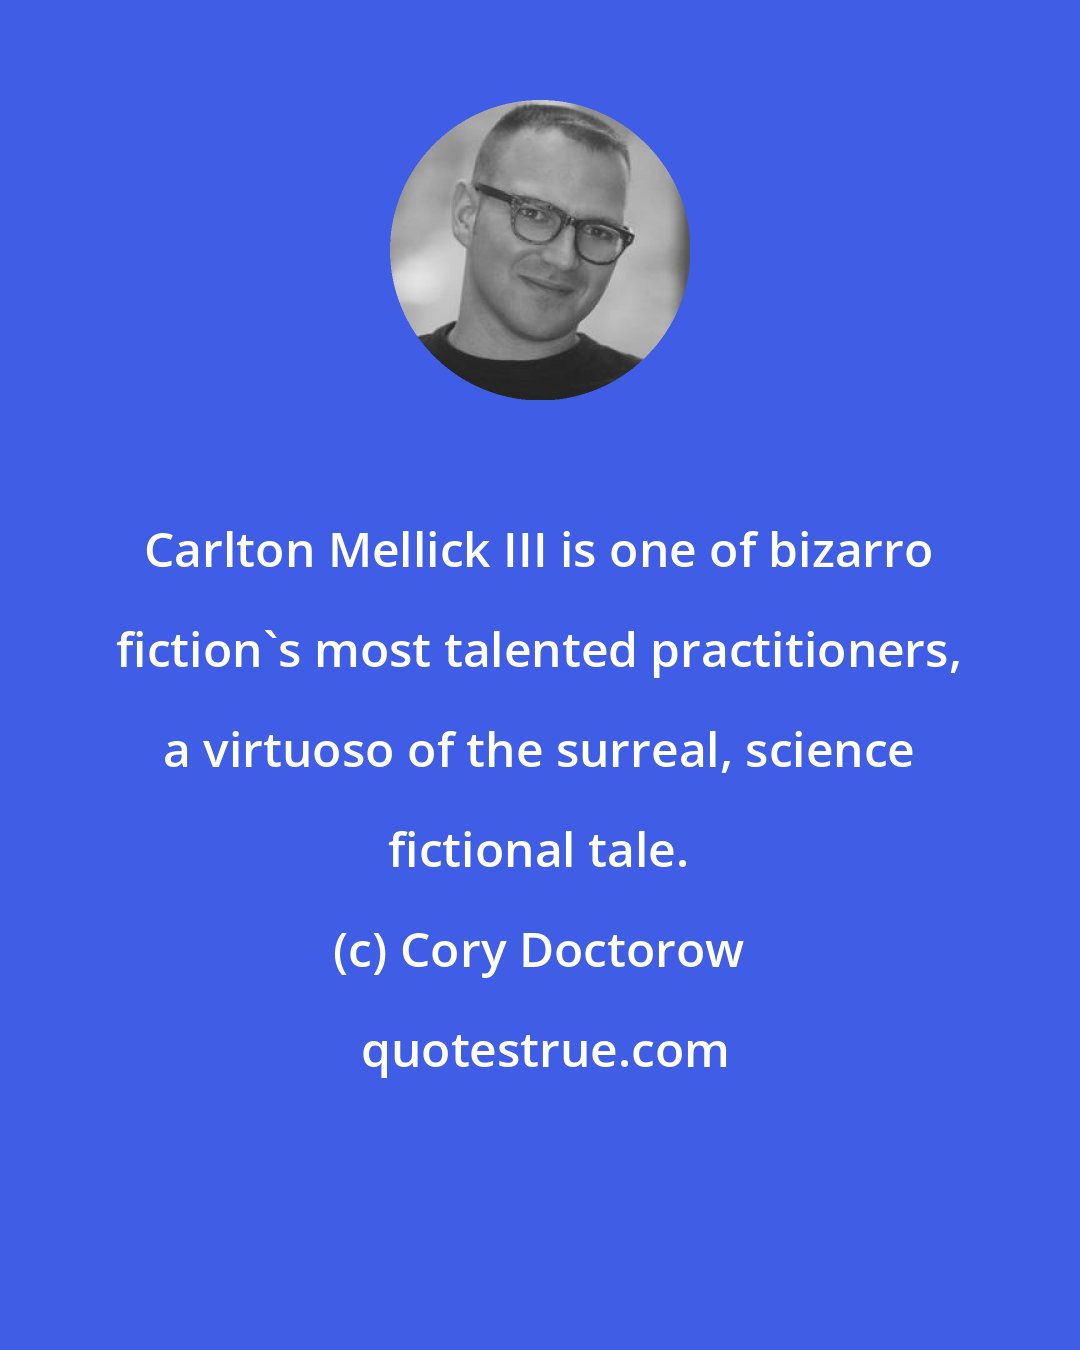 Cory Doctorow: Carlton Mellick III is one of bizarro fiction's most talented practitioners, a virtuoso of the surreal, science fictional tale.